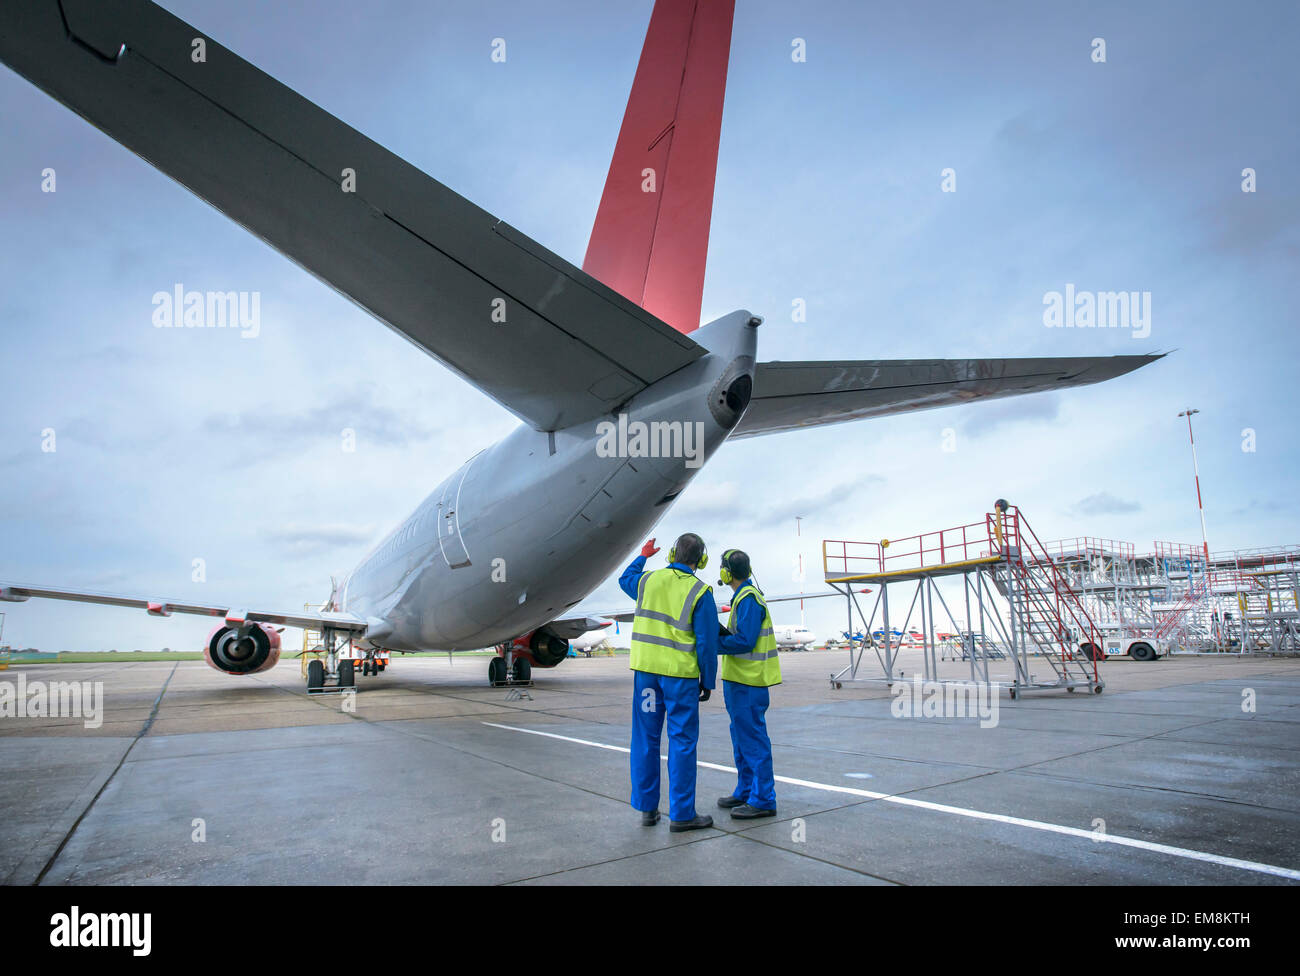 Airside engineers inspecting jet aircraft on runway Stock Photo